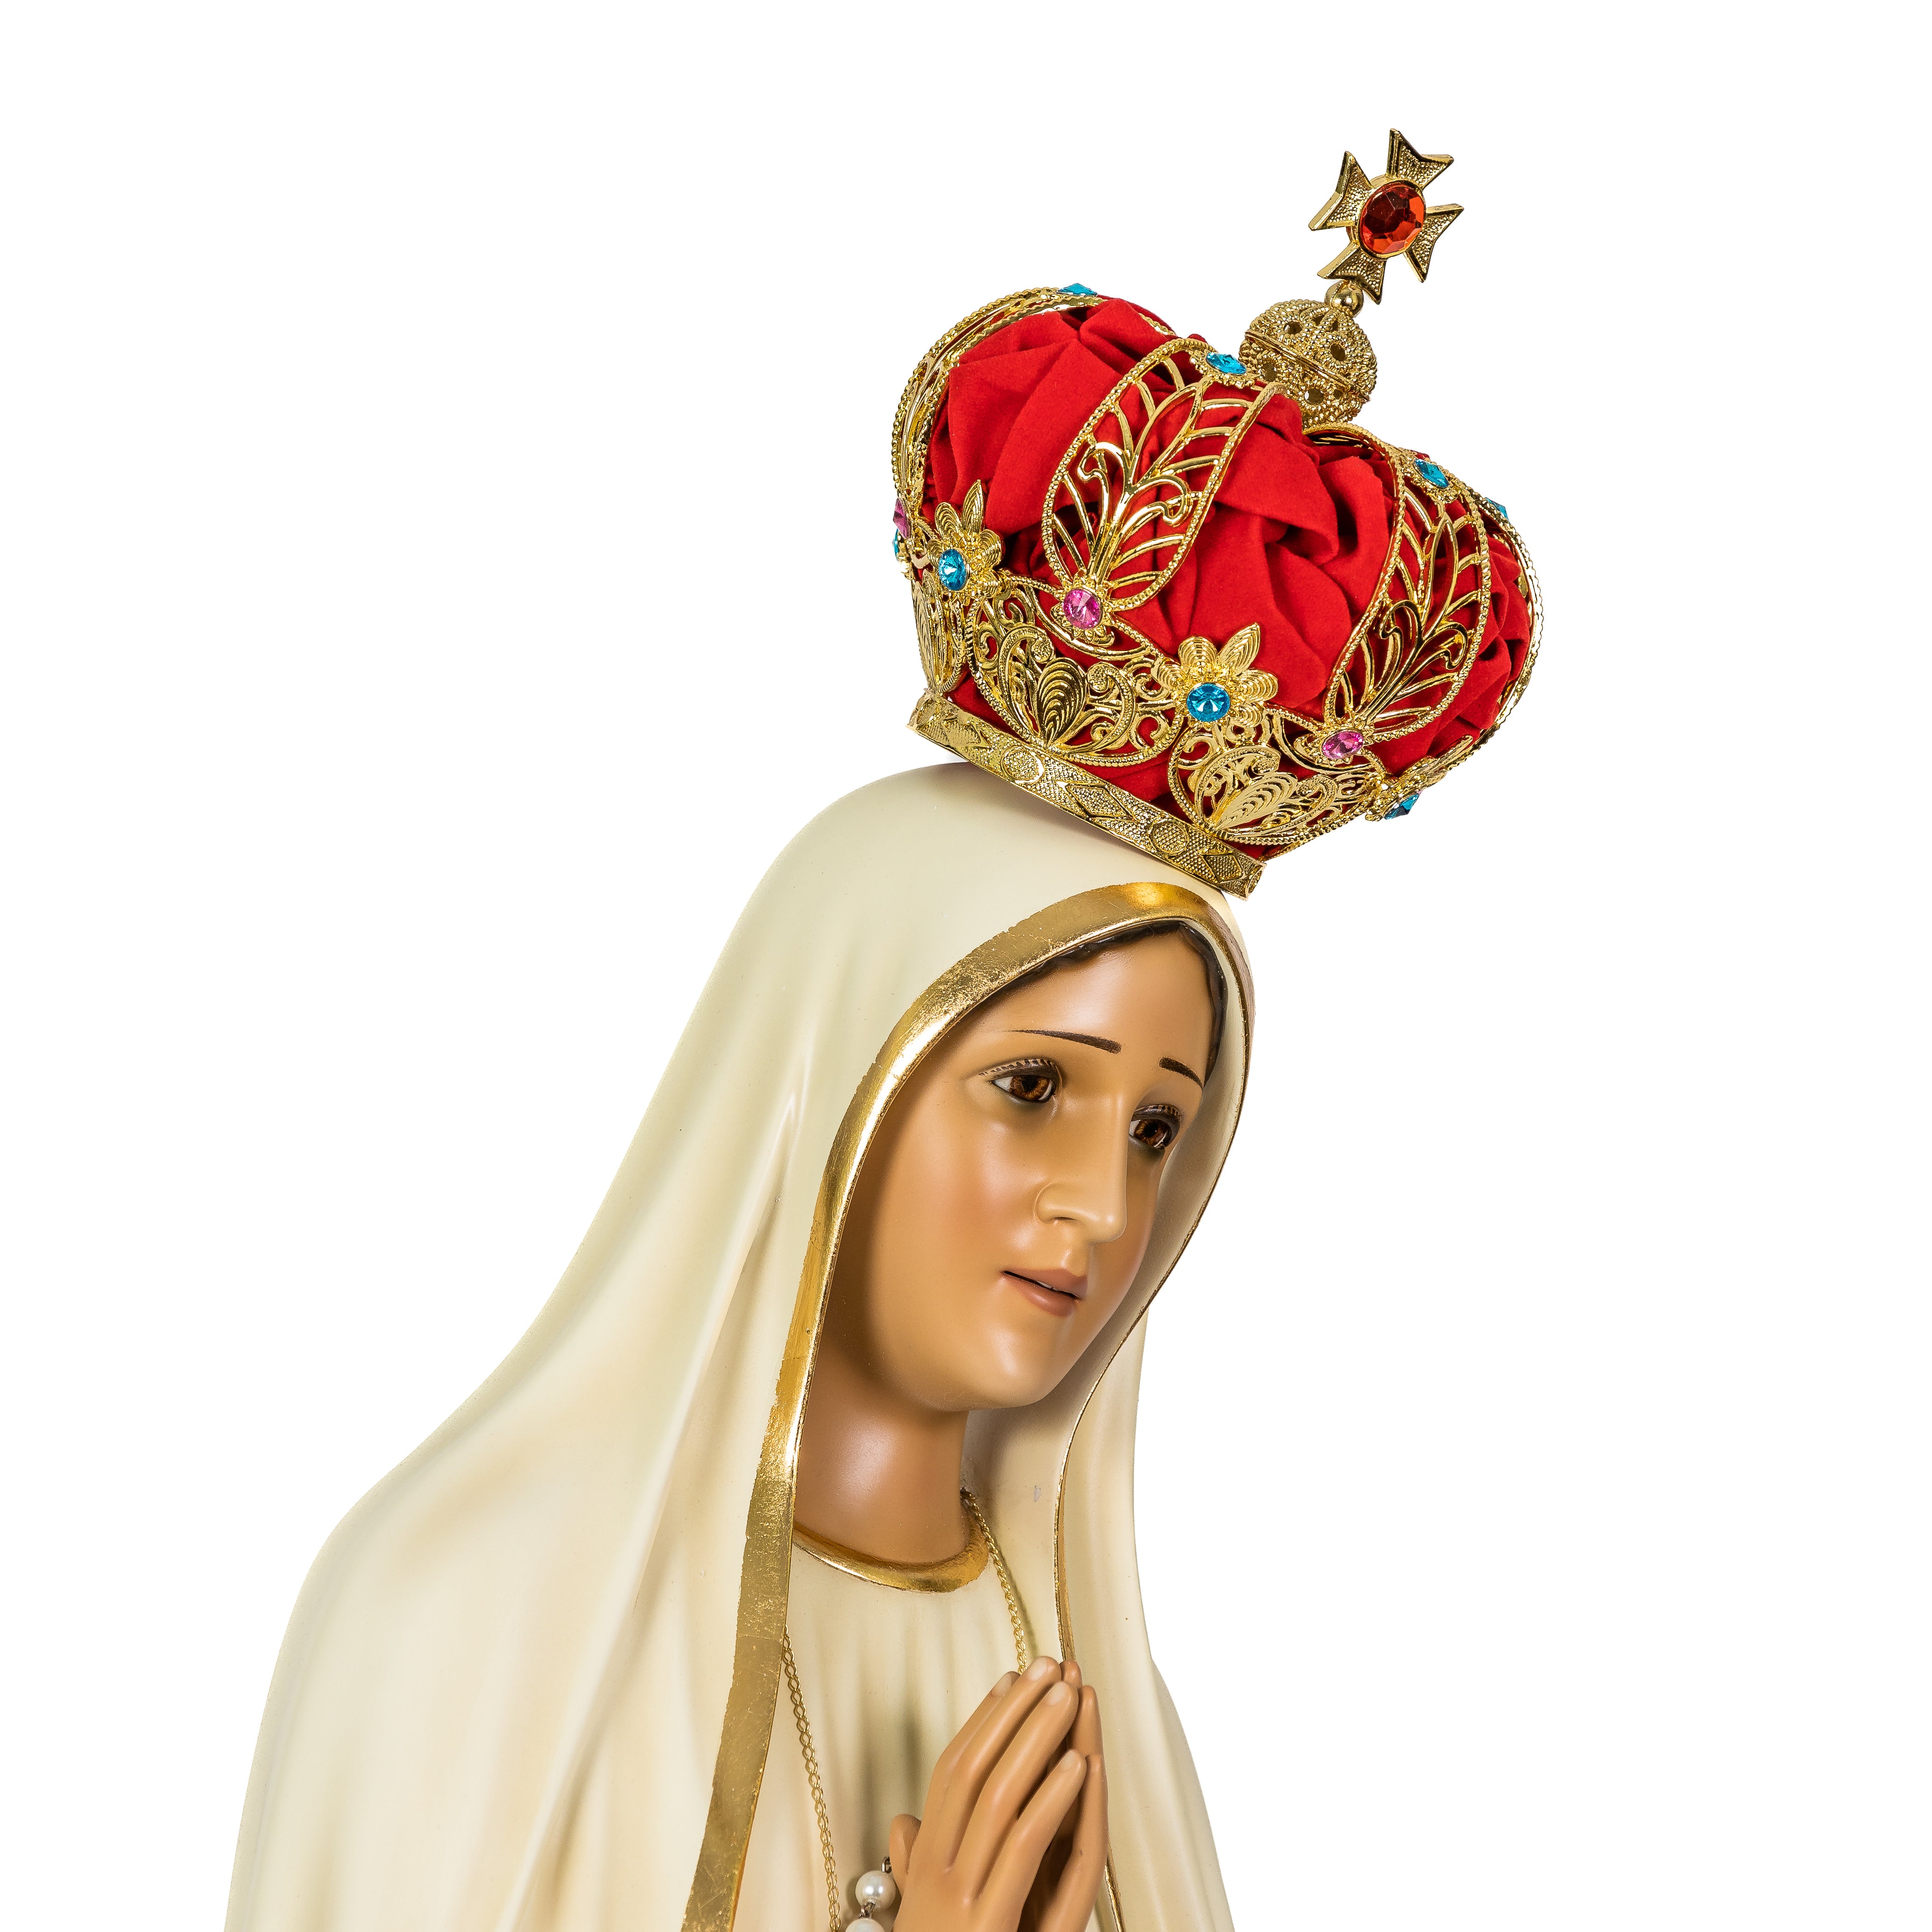 48 Inch Tall Handmade Catholic Statue of Our Lady of Fatima – My